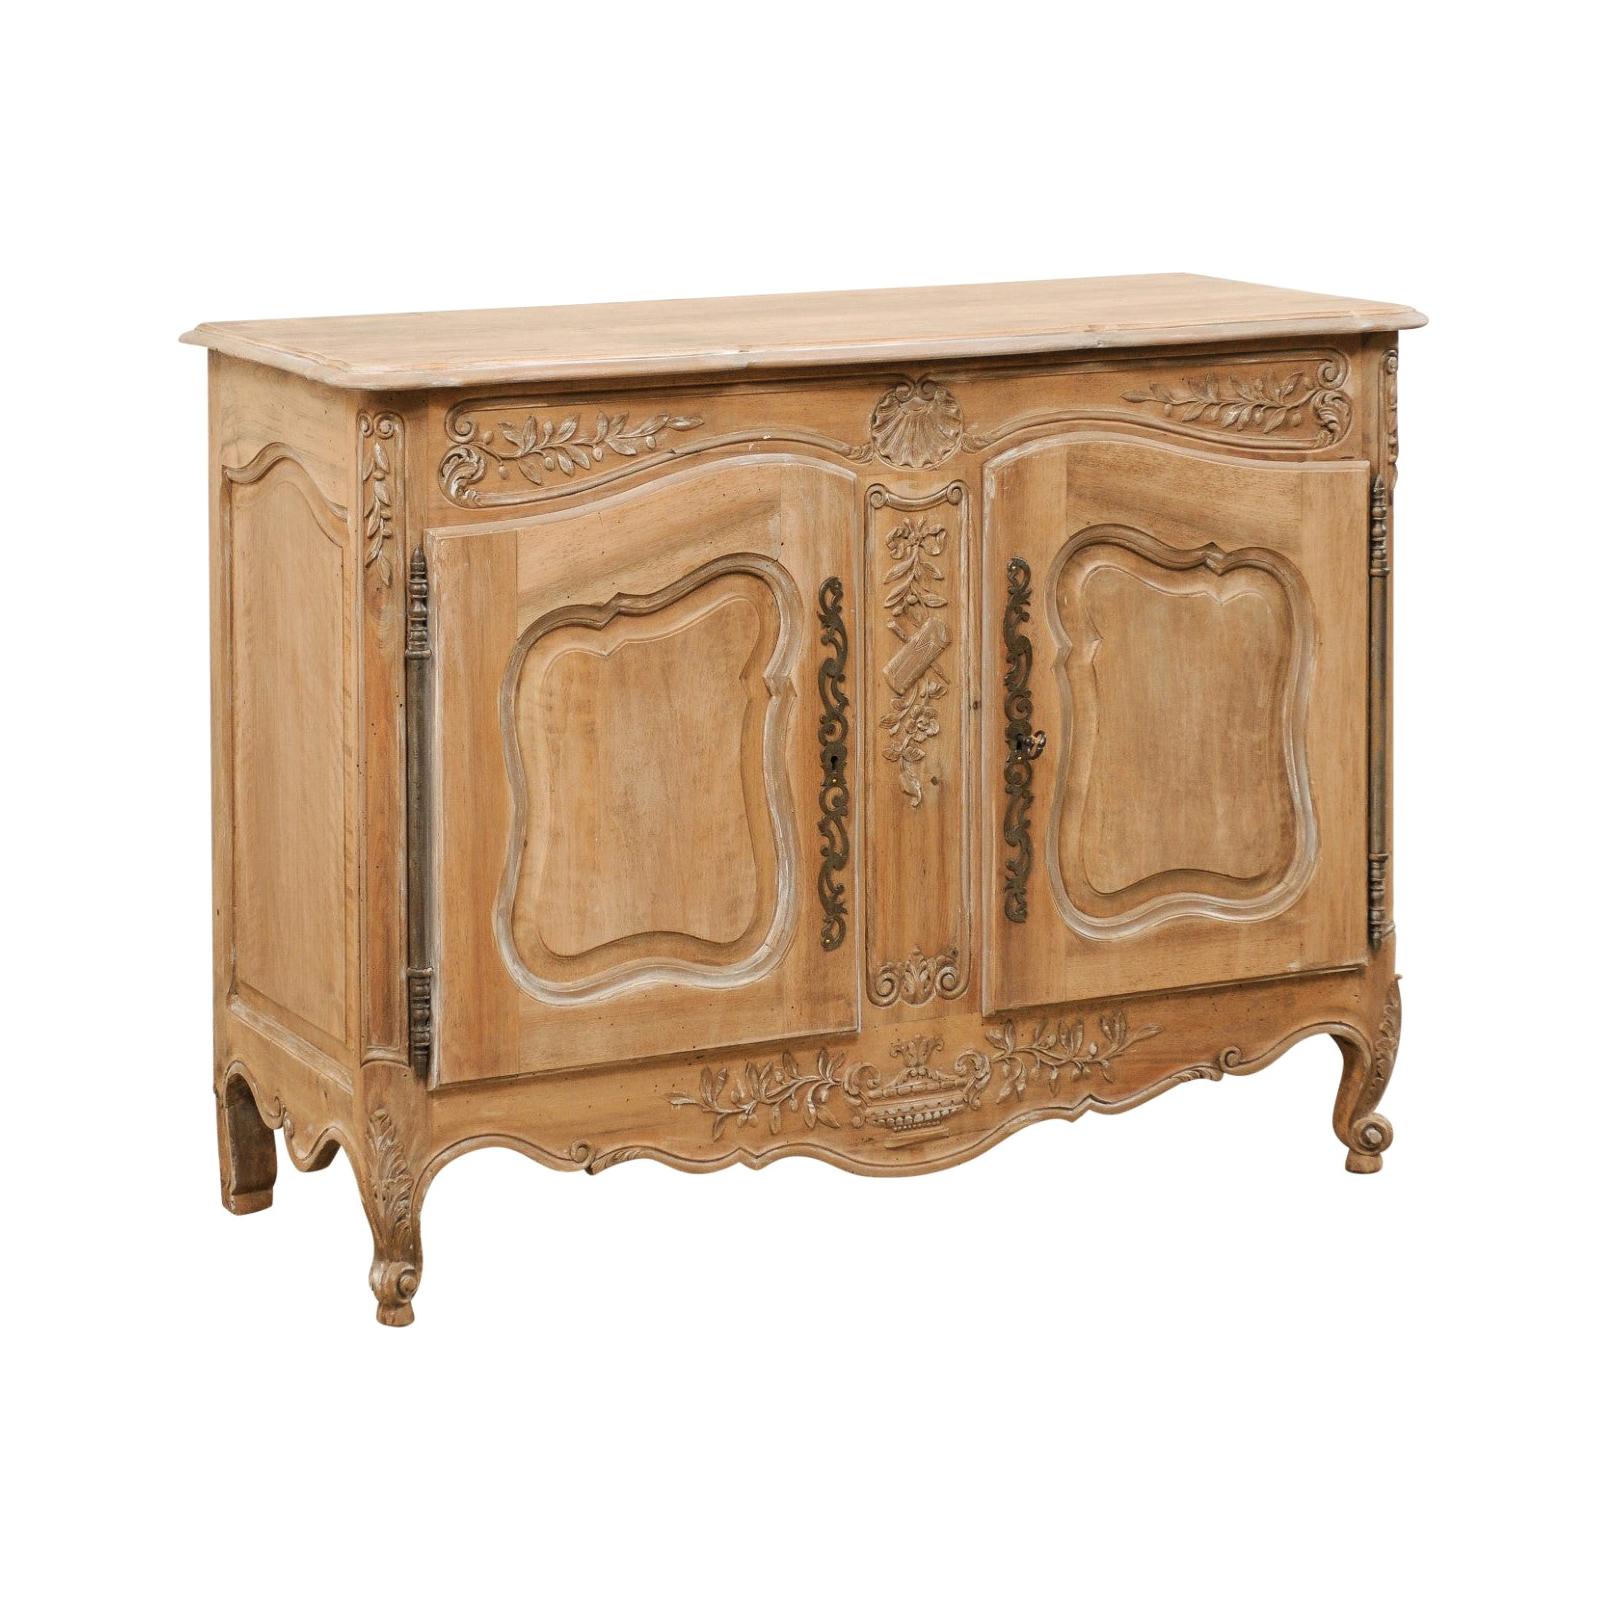 French Two-Paneled Door & Nicely Carved Bleached Wood Cabinet, Mid-20th Century